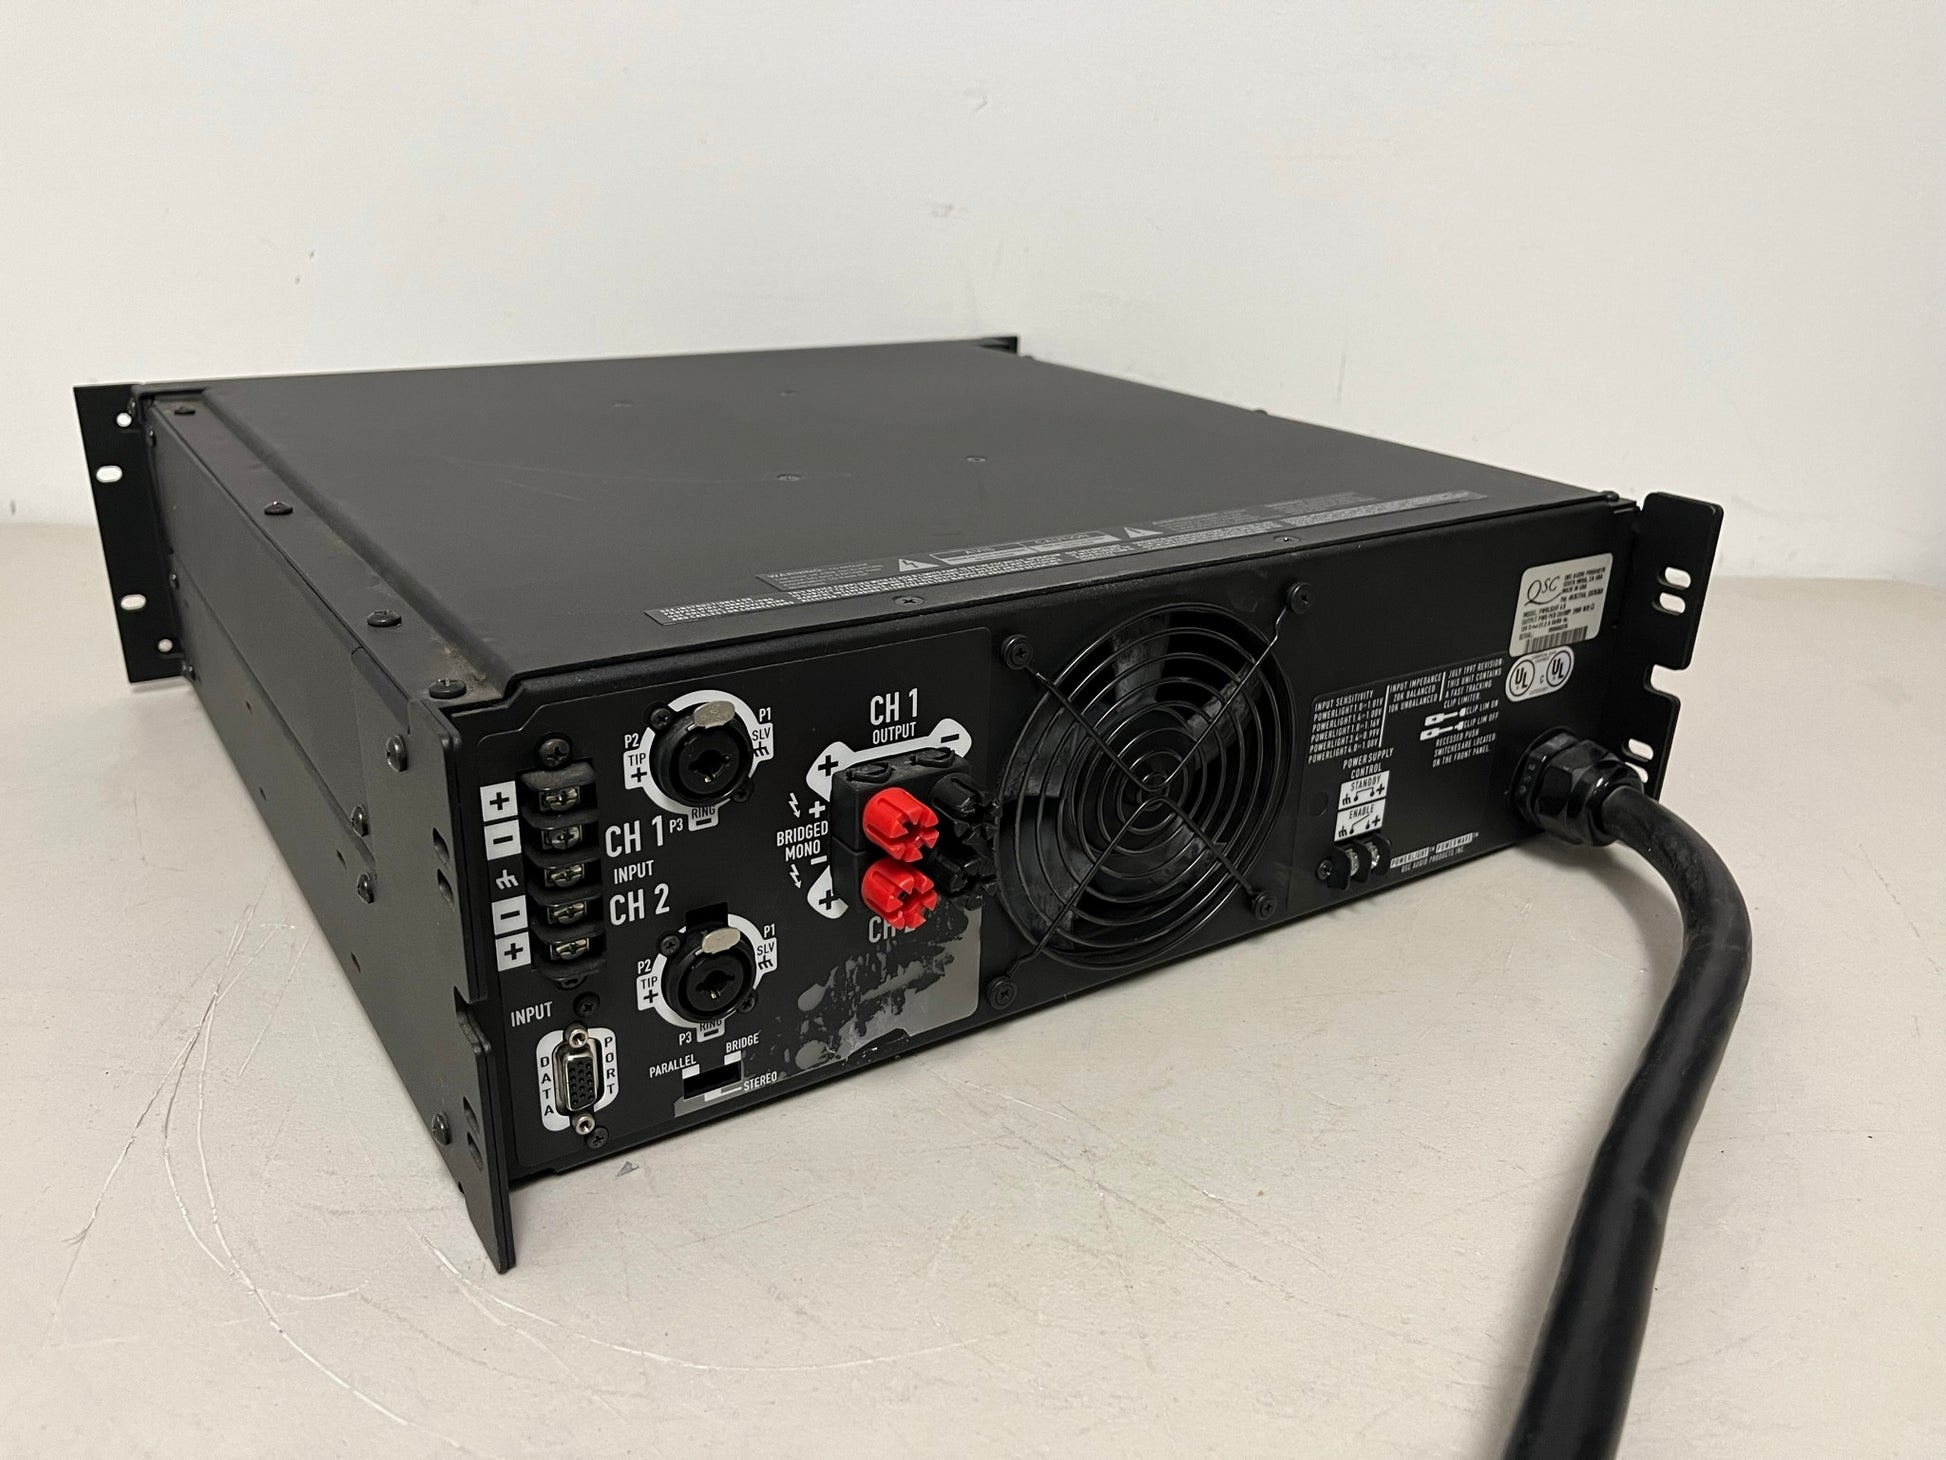 Used QSC PowerLight 4.0 Pro Audio Power Amplifier PL4.0 4000 Watts for Sale. We Sell Professional Audio Equipment. Audio Systems, Amplifiers, Consoles, Mixers, Electronics, Entertainment, Live Sound.